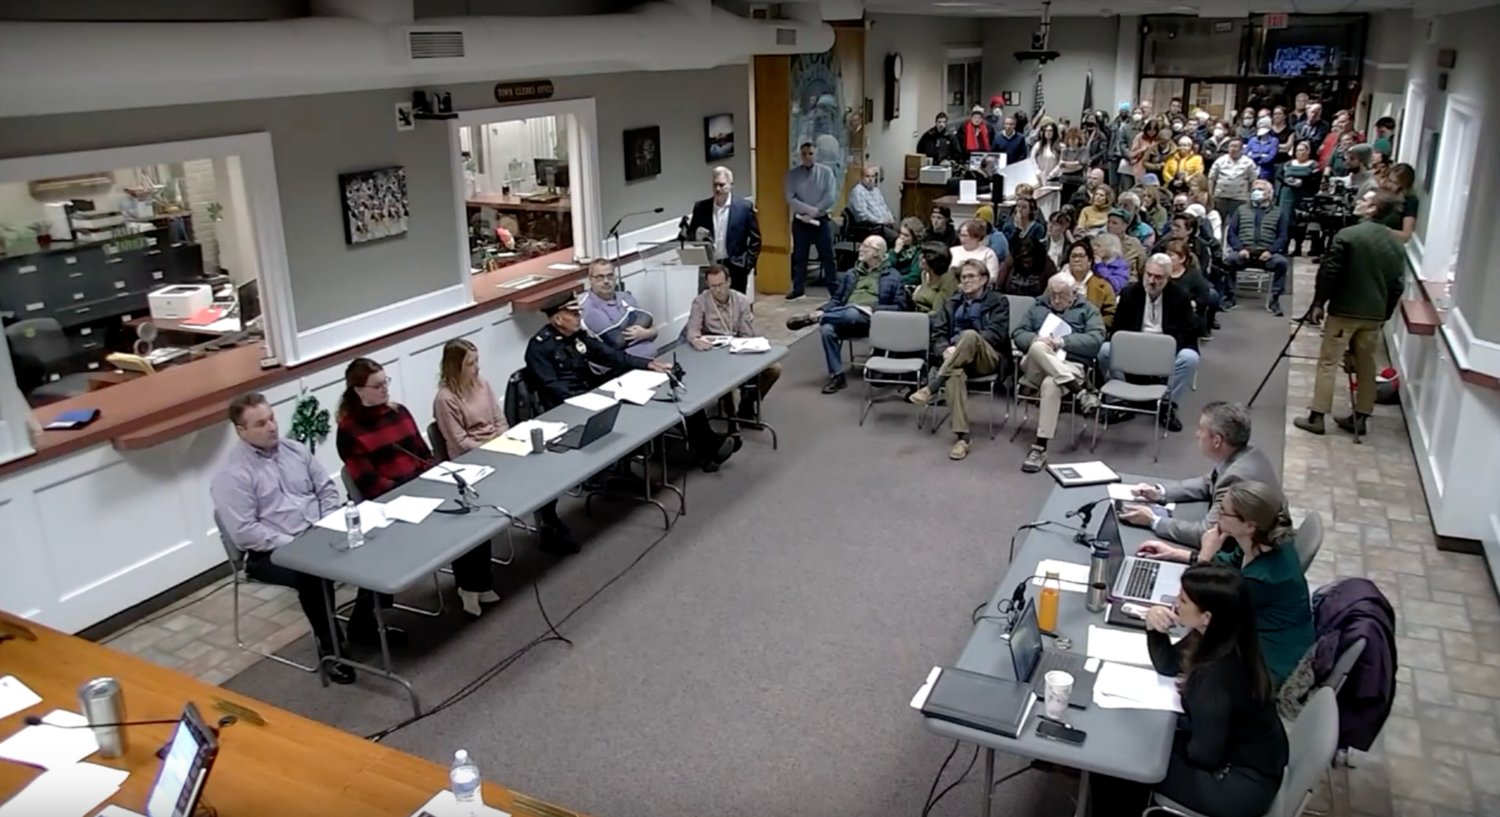 A screen grab from the Town Council meeting's recording on YouTube shows a standing room only crowd as Robert Botelho speaks at the podium.